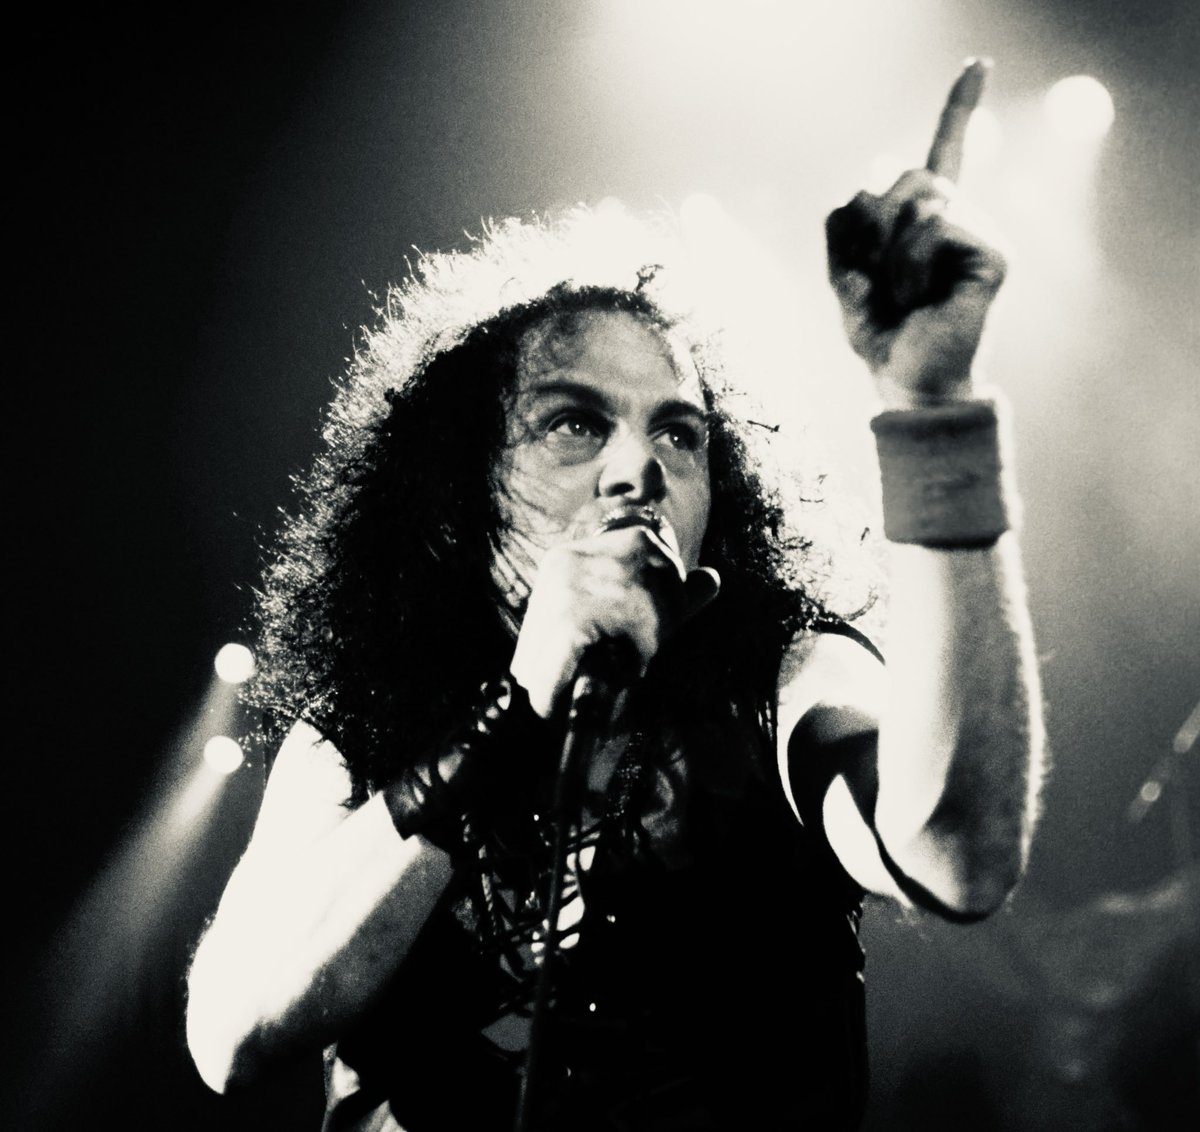 Don't talk to strangers
Because they're only there
To do you harm
Don't write in starlight
Because the words may come out real #RonnieJamesDio #HeavyMetal #VivianCampbell #VinnyAppice #JimmyBain #ClassicRock